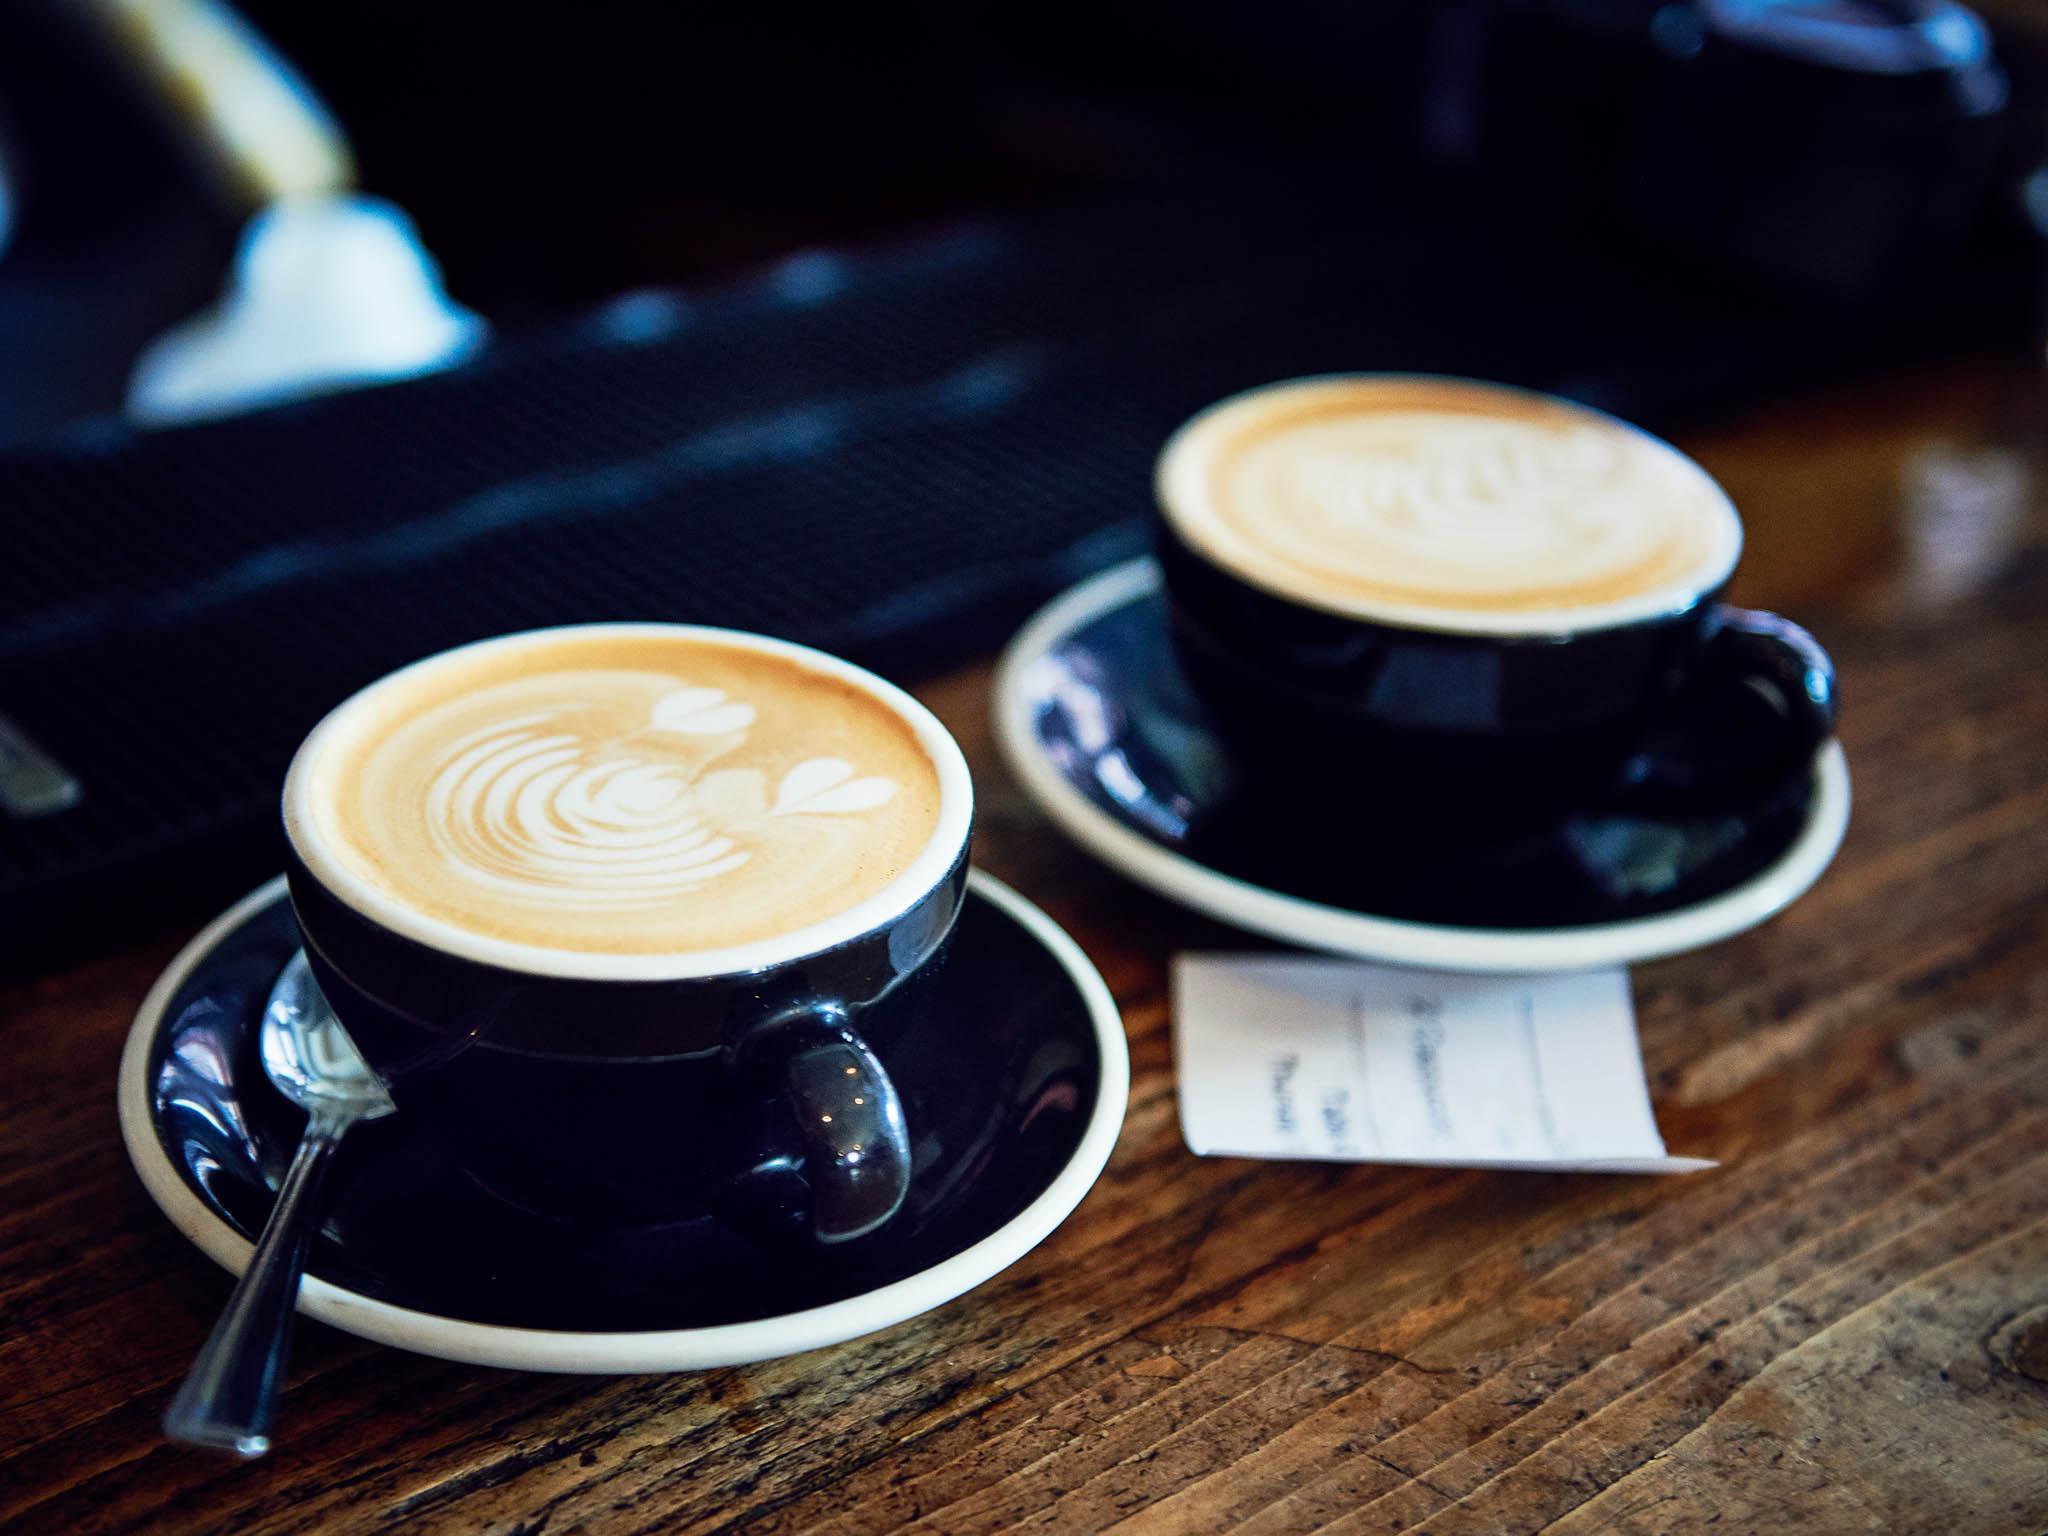 Over 30,000 people attended the London Coffee Festival last year